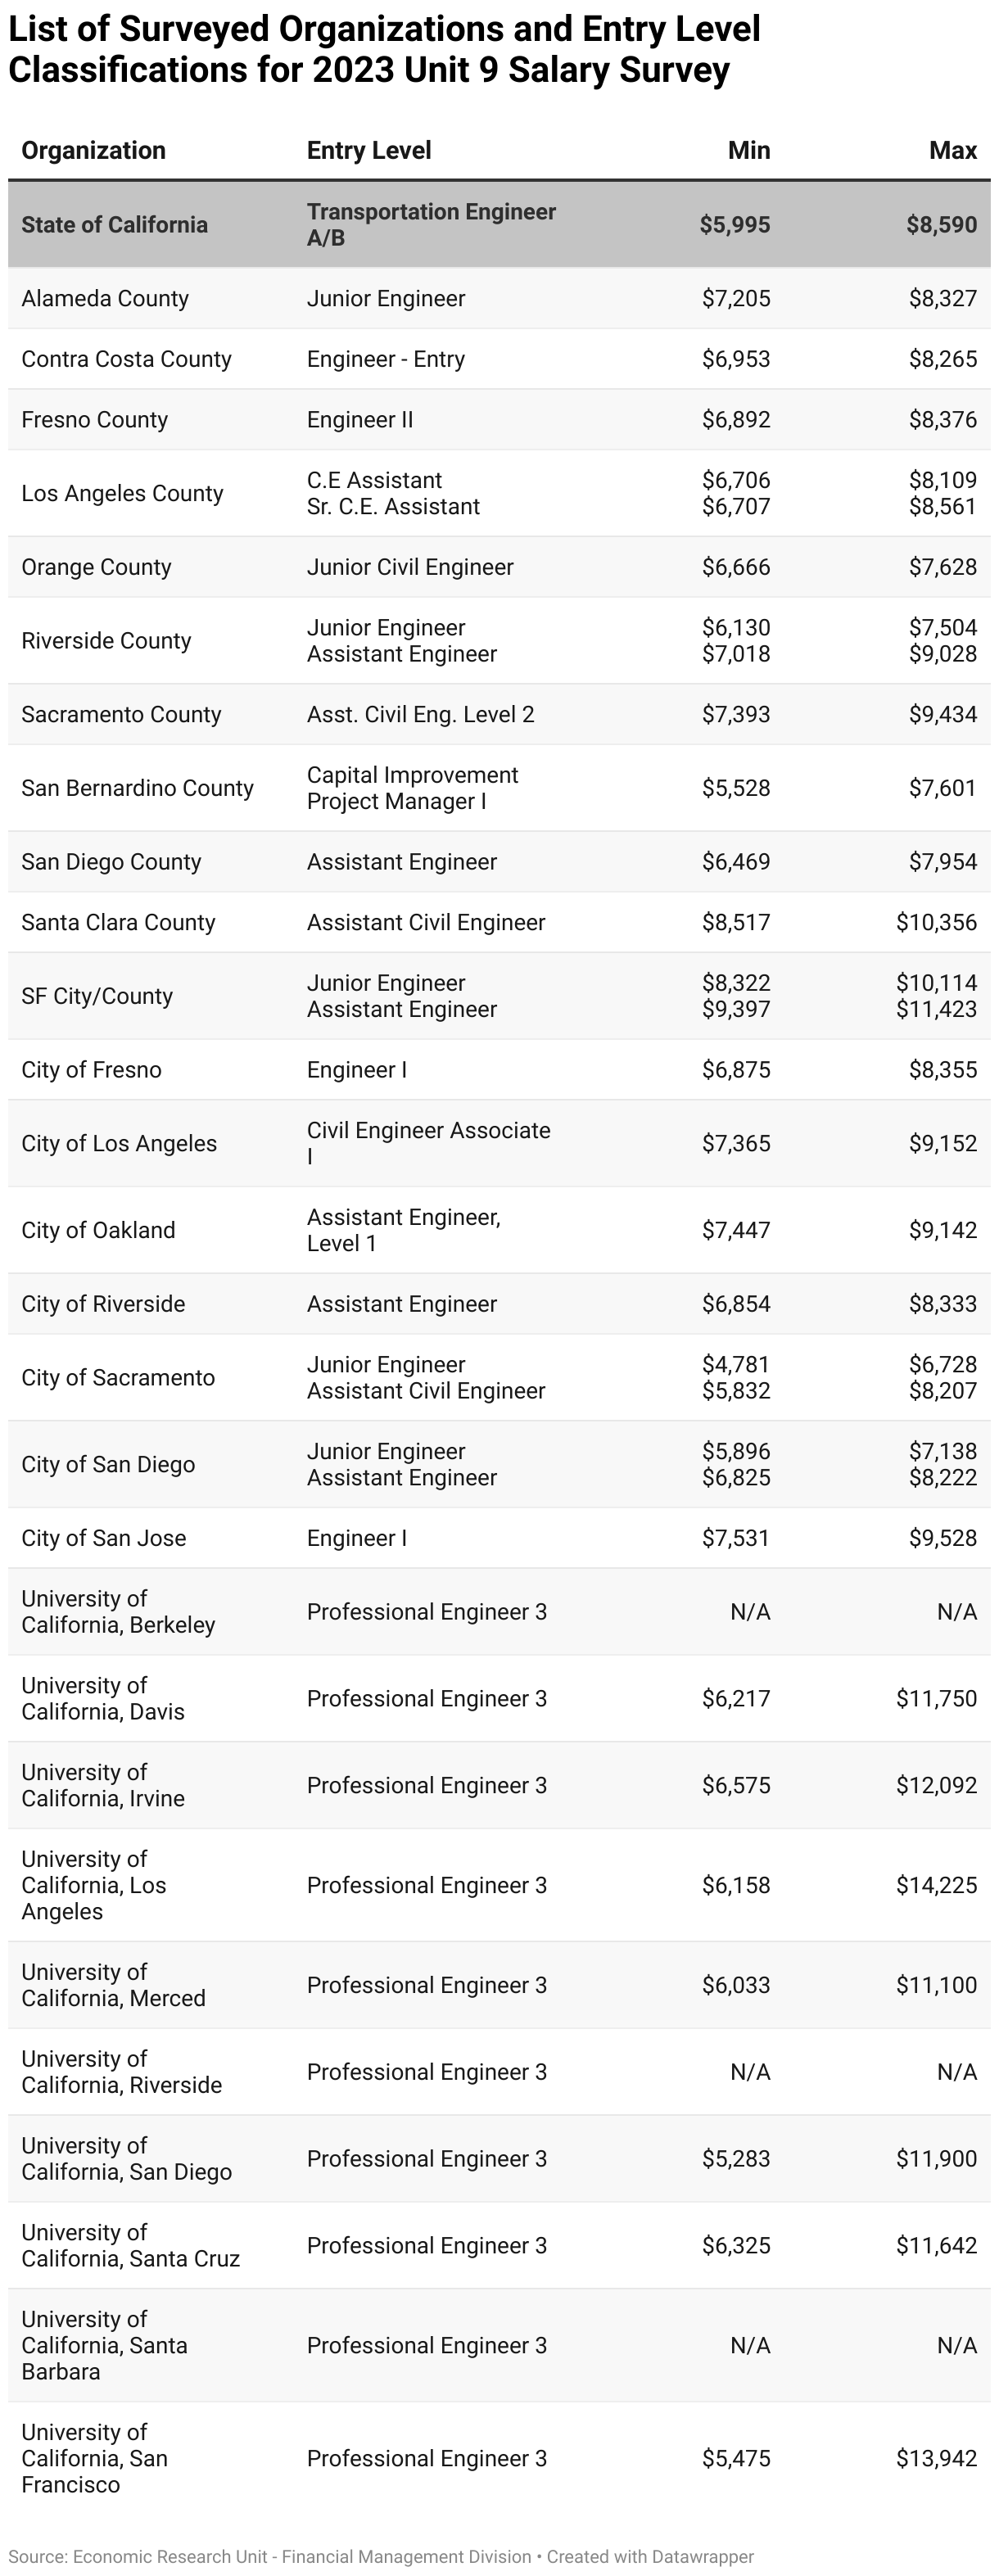 The following chart shows the minimum and maximum salaries for the entry level classifications for the different organizations involved in the Unit 9 Salary Survey. The State of California entry level position is Transportation Engineer A/B and has a minimum salary of $5,995 and a maximum salary of $8,590. Many of the organizations in the Unit 9 Salary Survey have a higher minimum salary and a higher maximum salary for their entry level classification than the State.